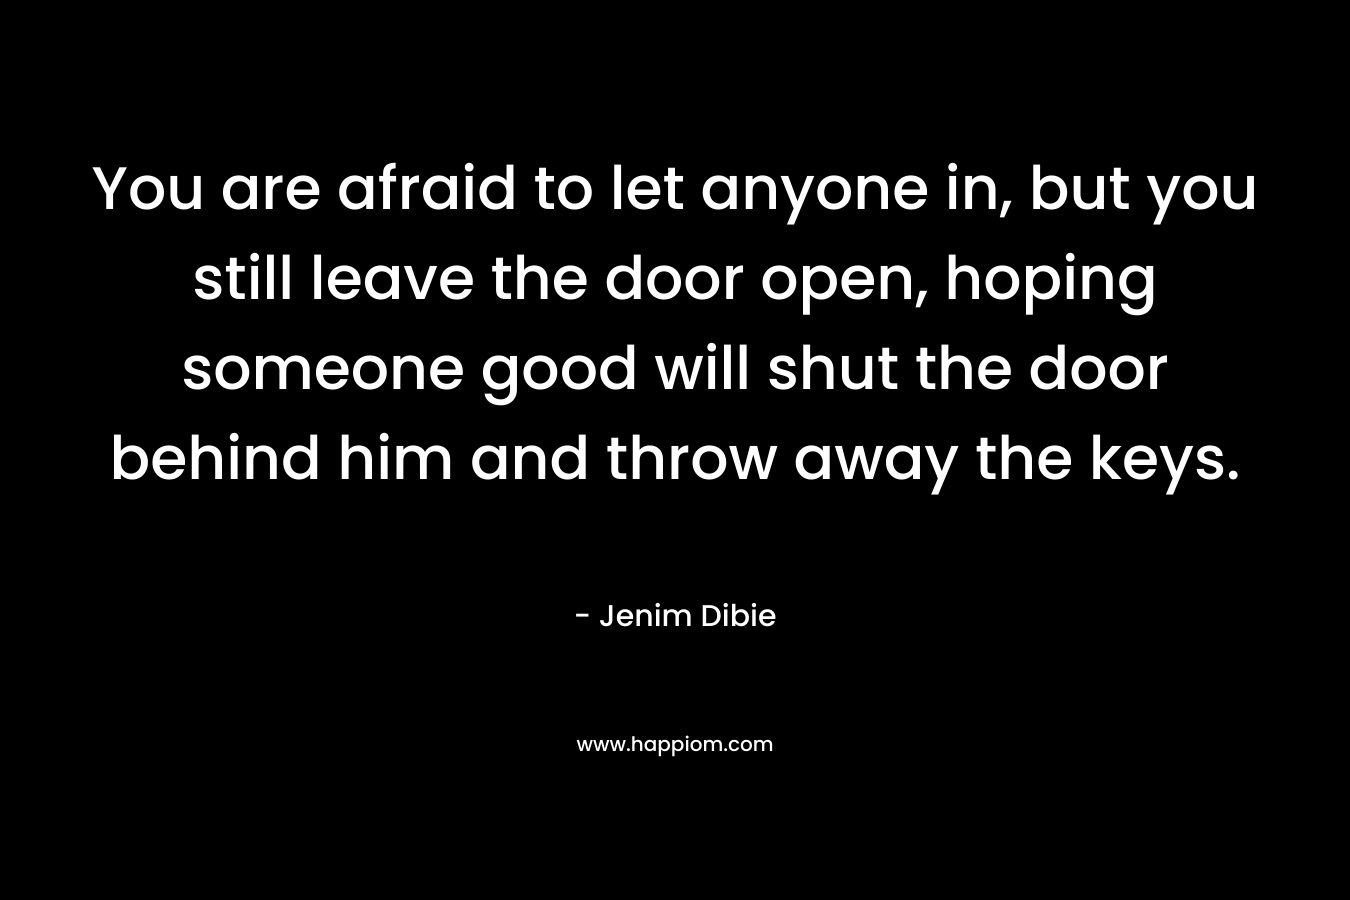 You are afraid to let anyone in, but you still leave the door open, hoping someone good will shut the door behind him and throw away the keys.